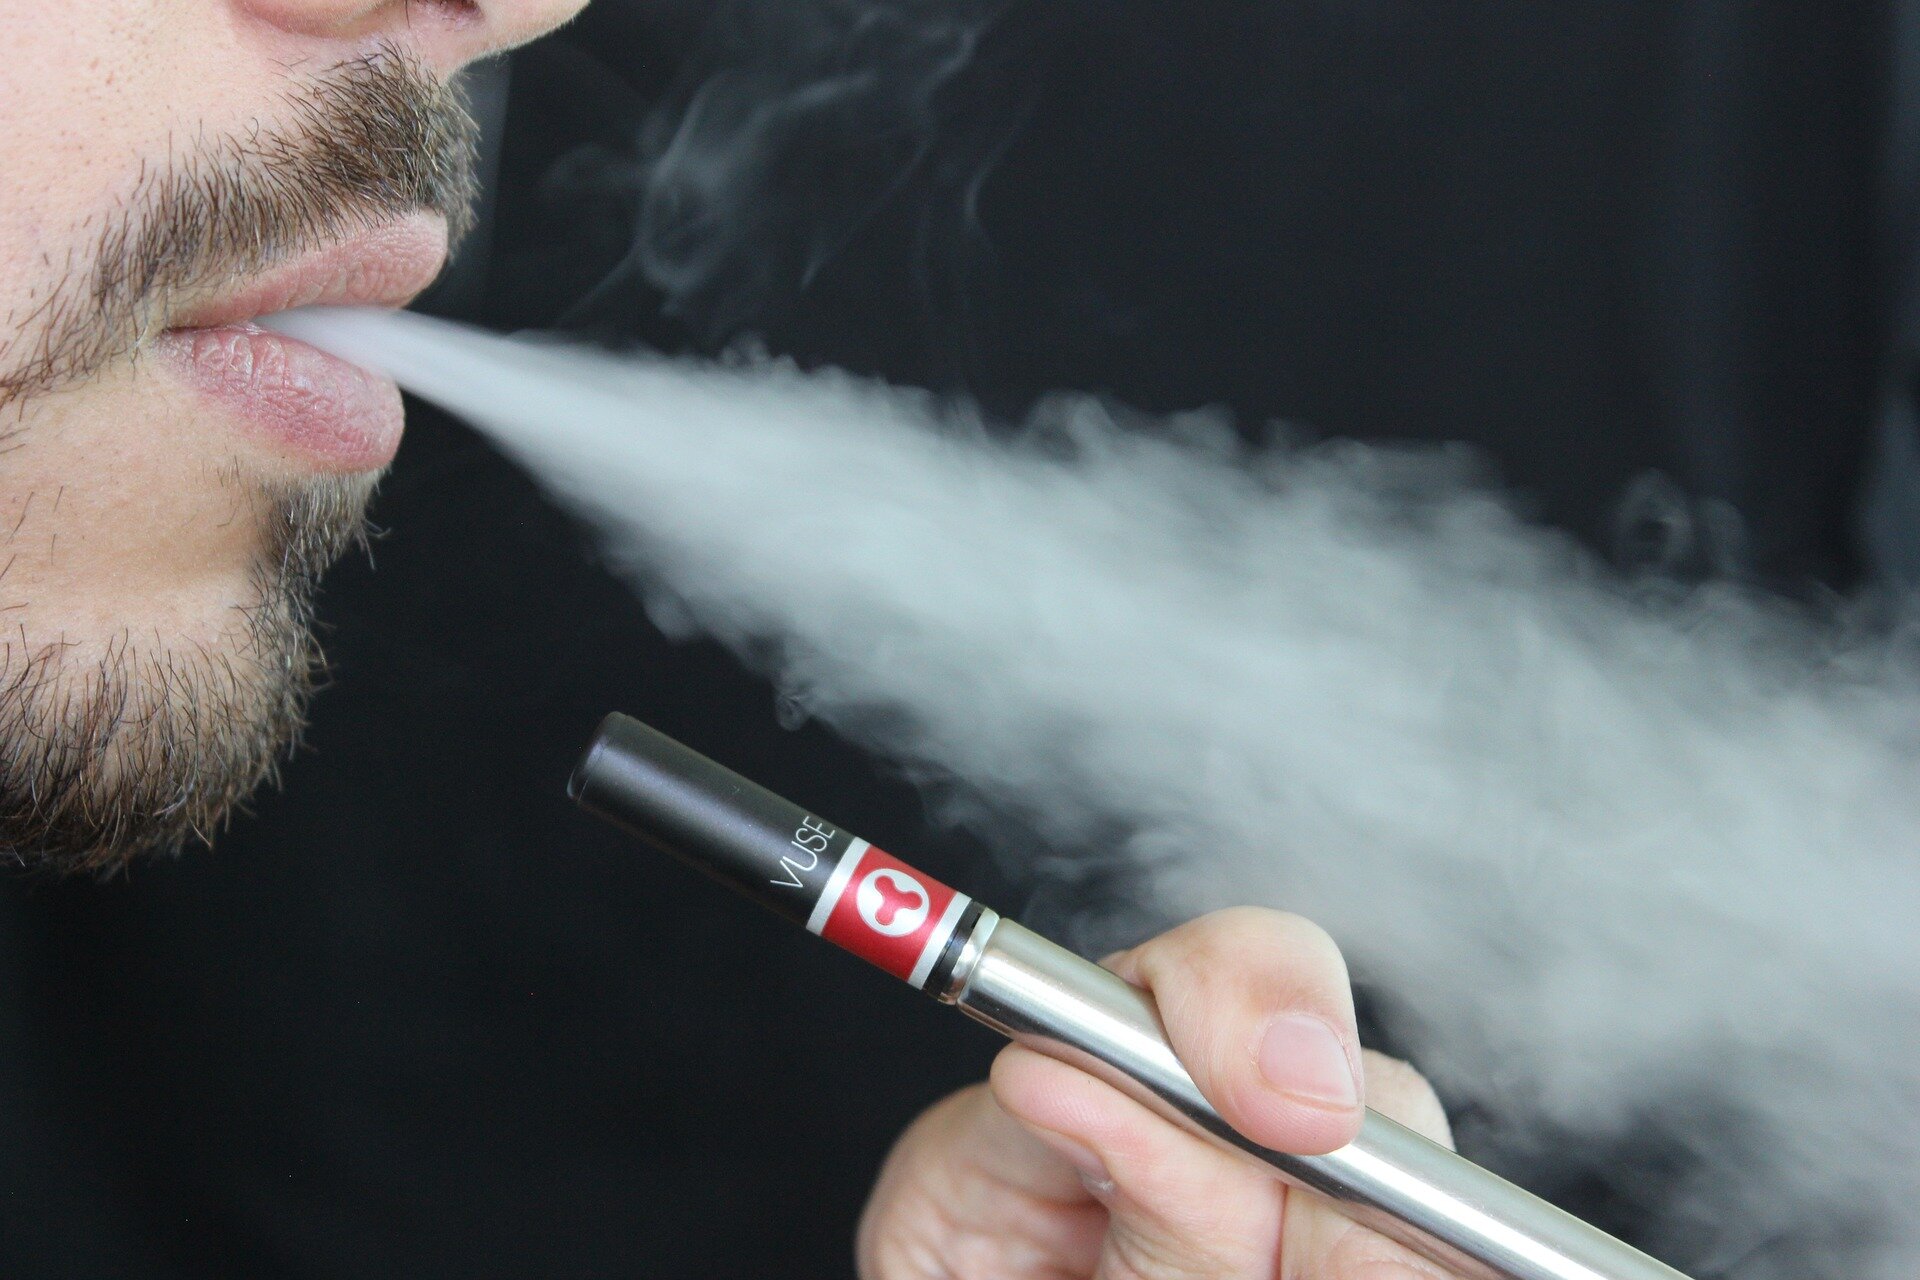 E-Cigs Are Still Flooding the US, Addicting Teens With Higher Nicotine  Doses - KFF Health News